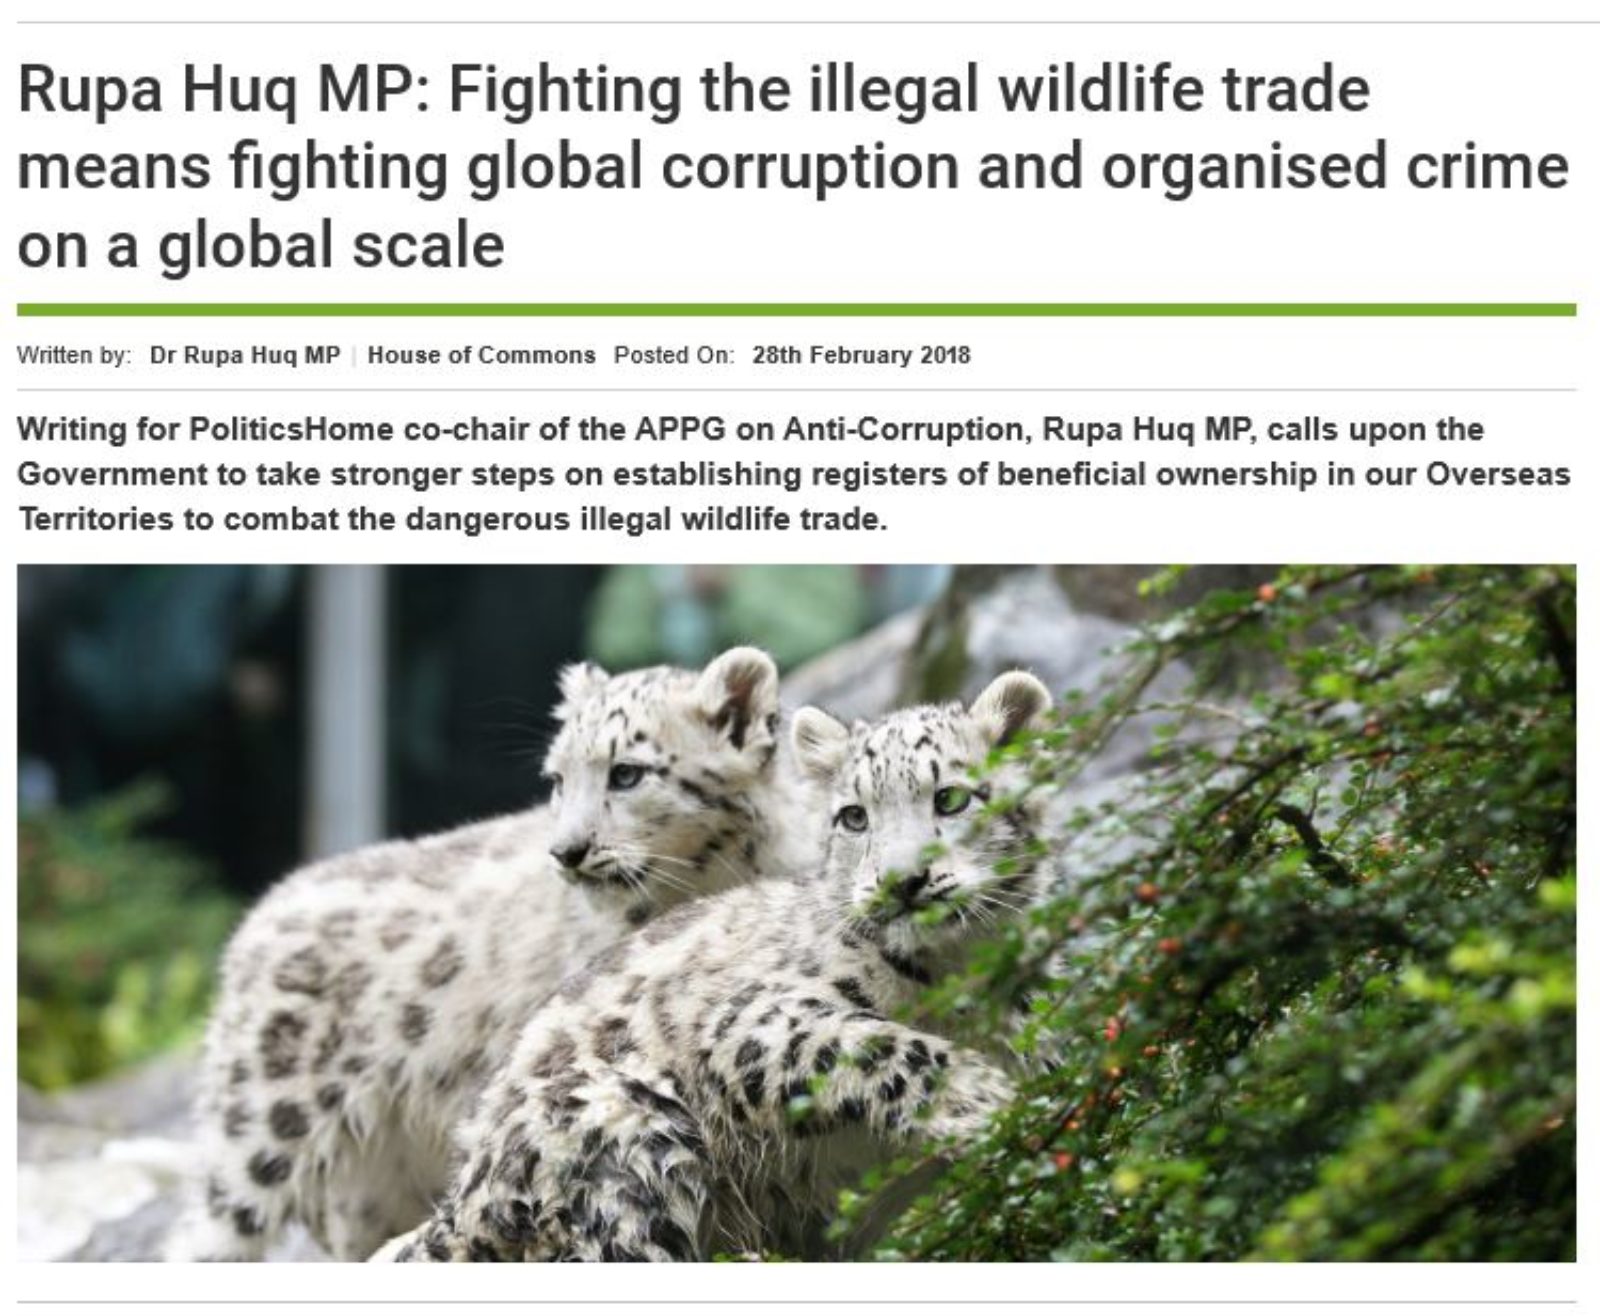 Politics Home: Fighting the illegal wildlife trade means fighting global corruption and organised crime on a global scale